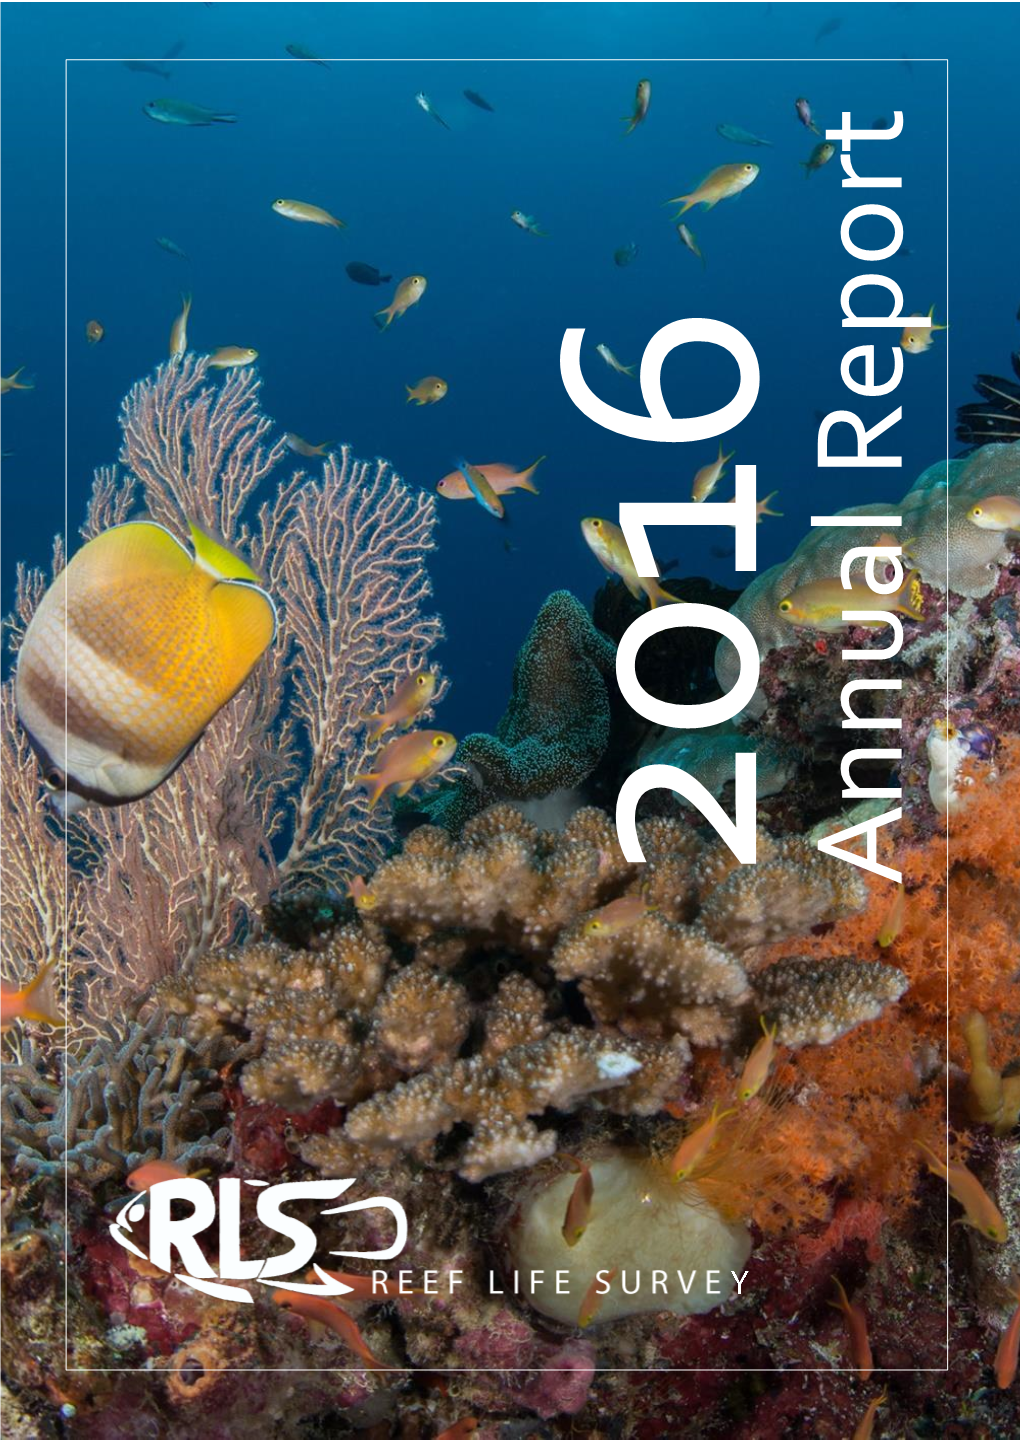 Download 2016 Annual Report